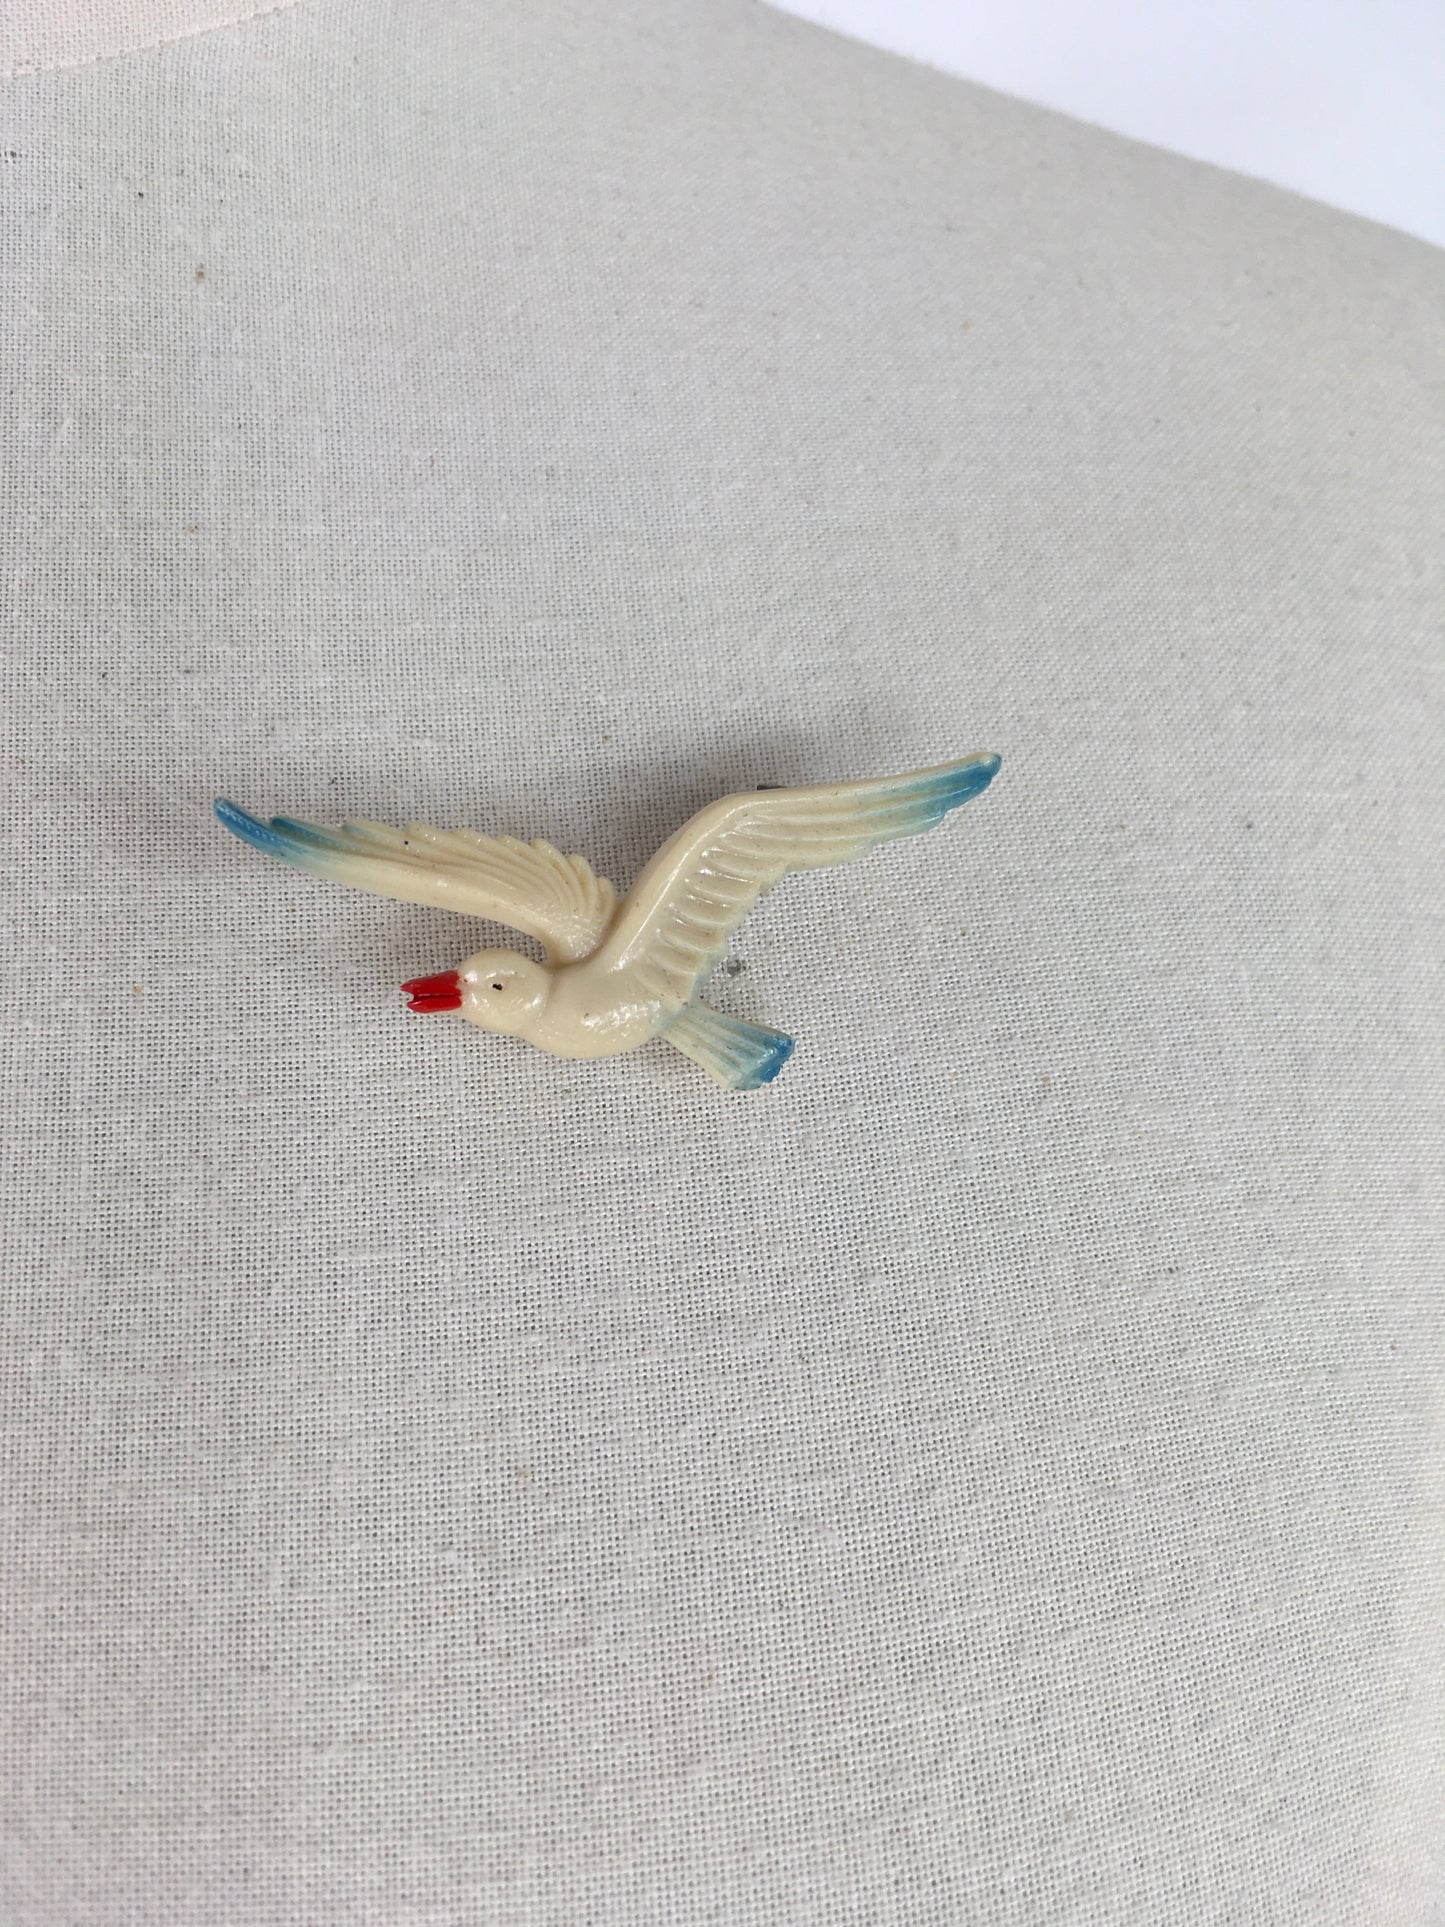 Original 1940s Celluloid Seagull Brooch - With lovely Details and Colourings